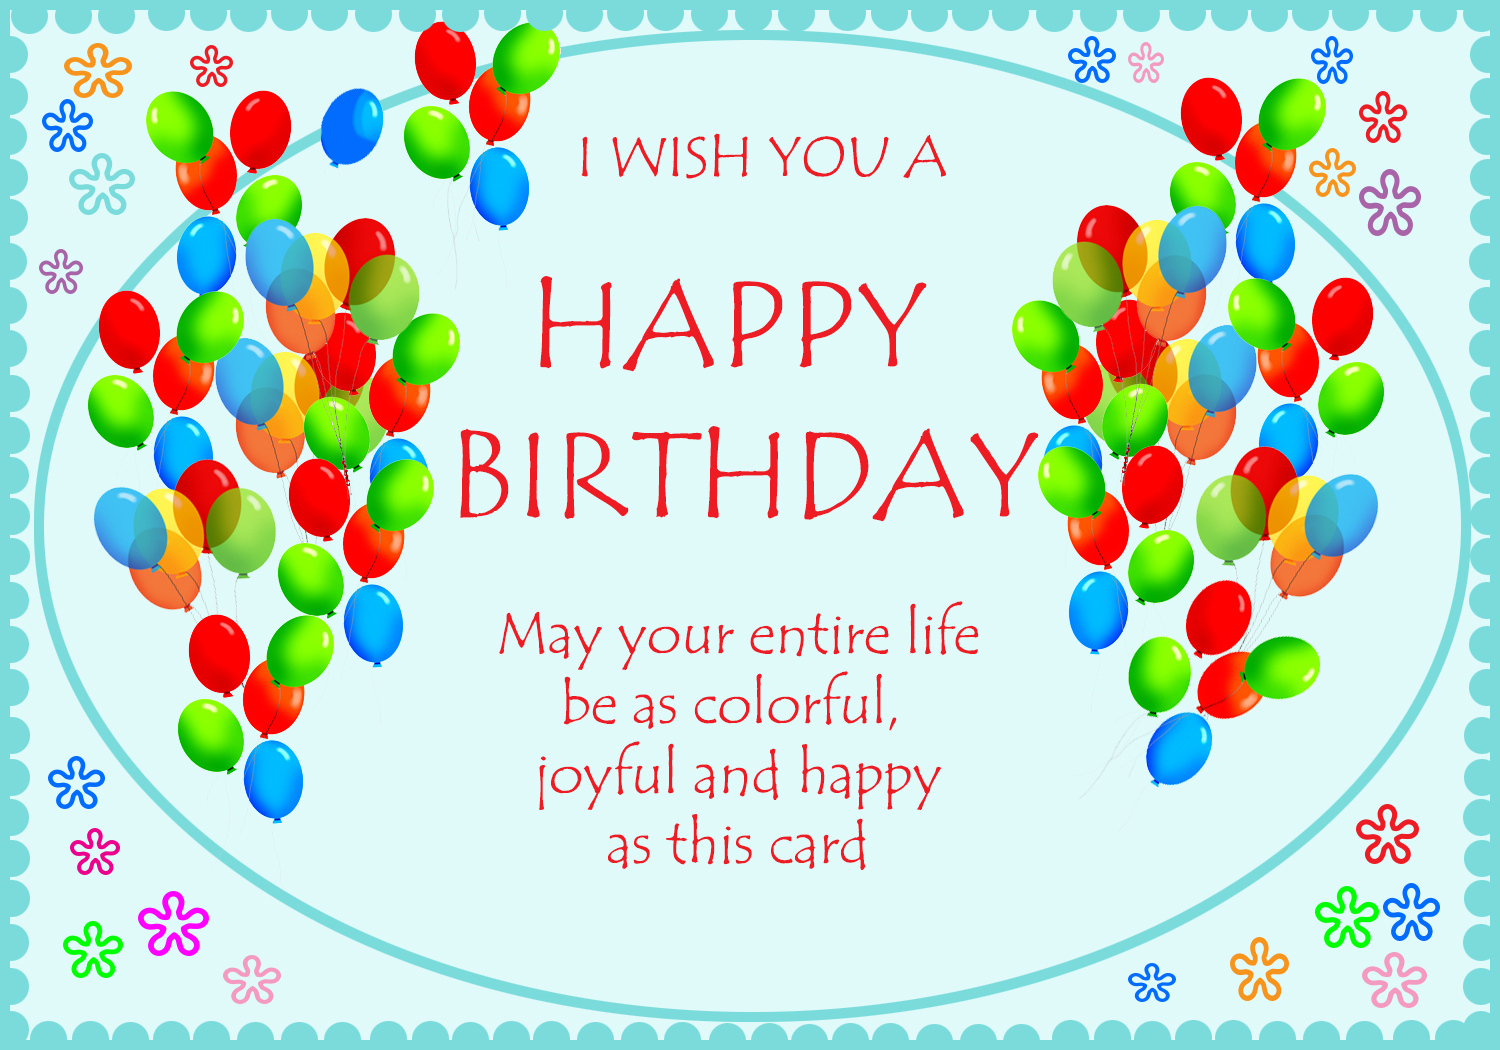 Happy Birthday Card For You Free Printable Greeting Cards | FREE ...